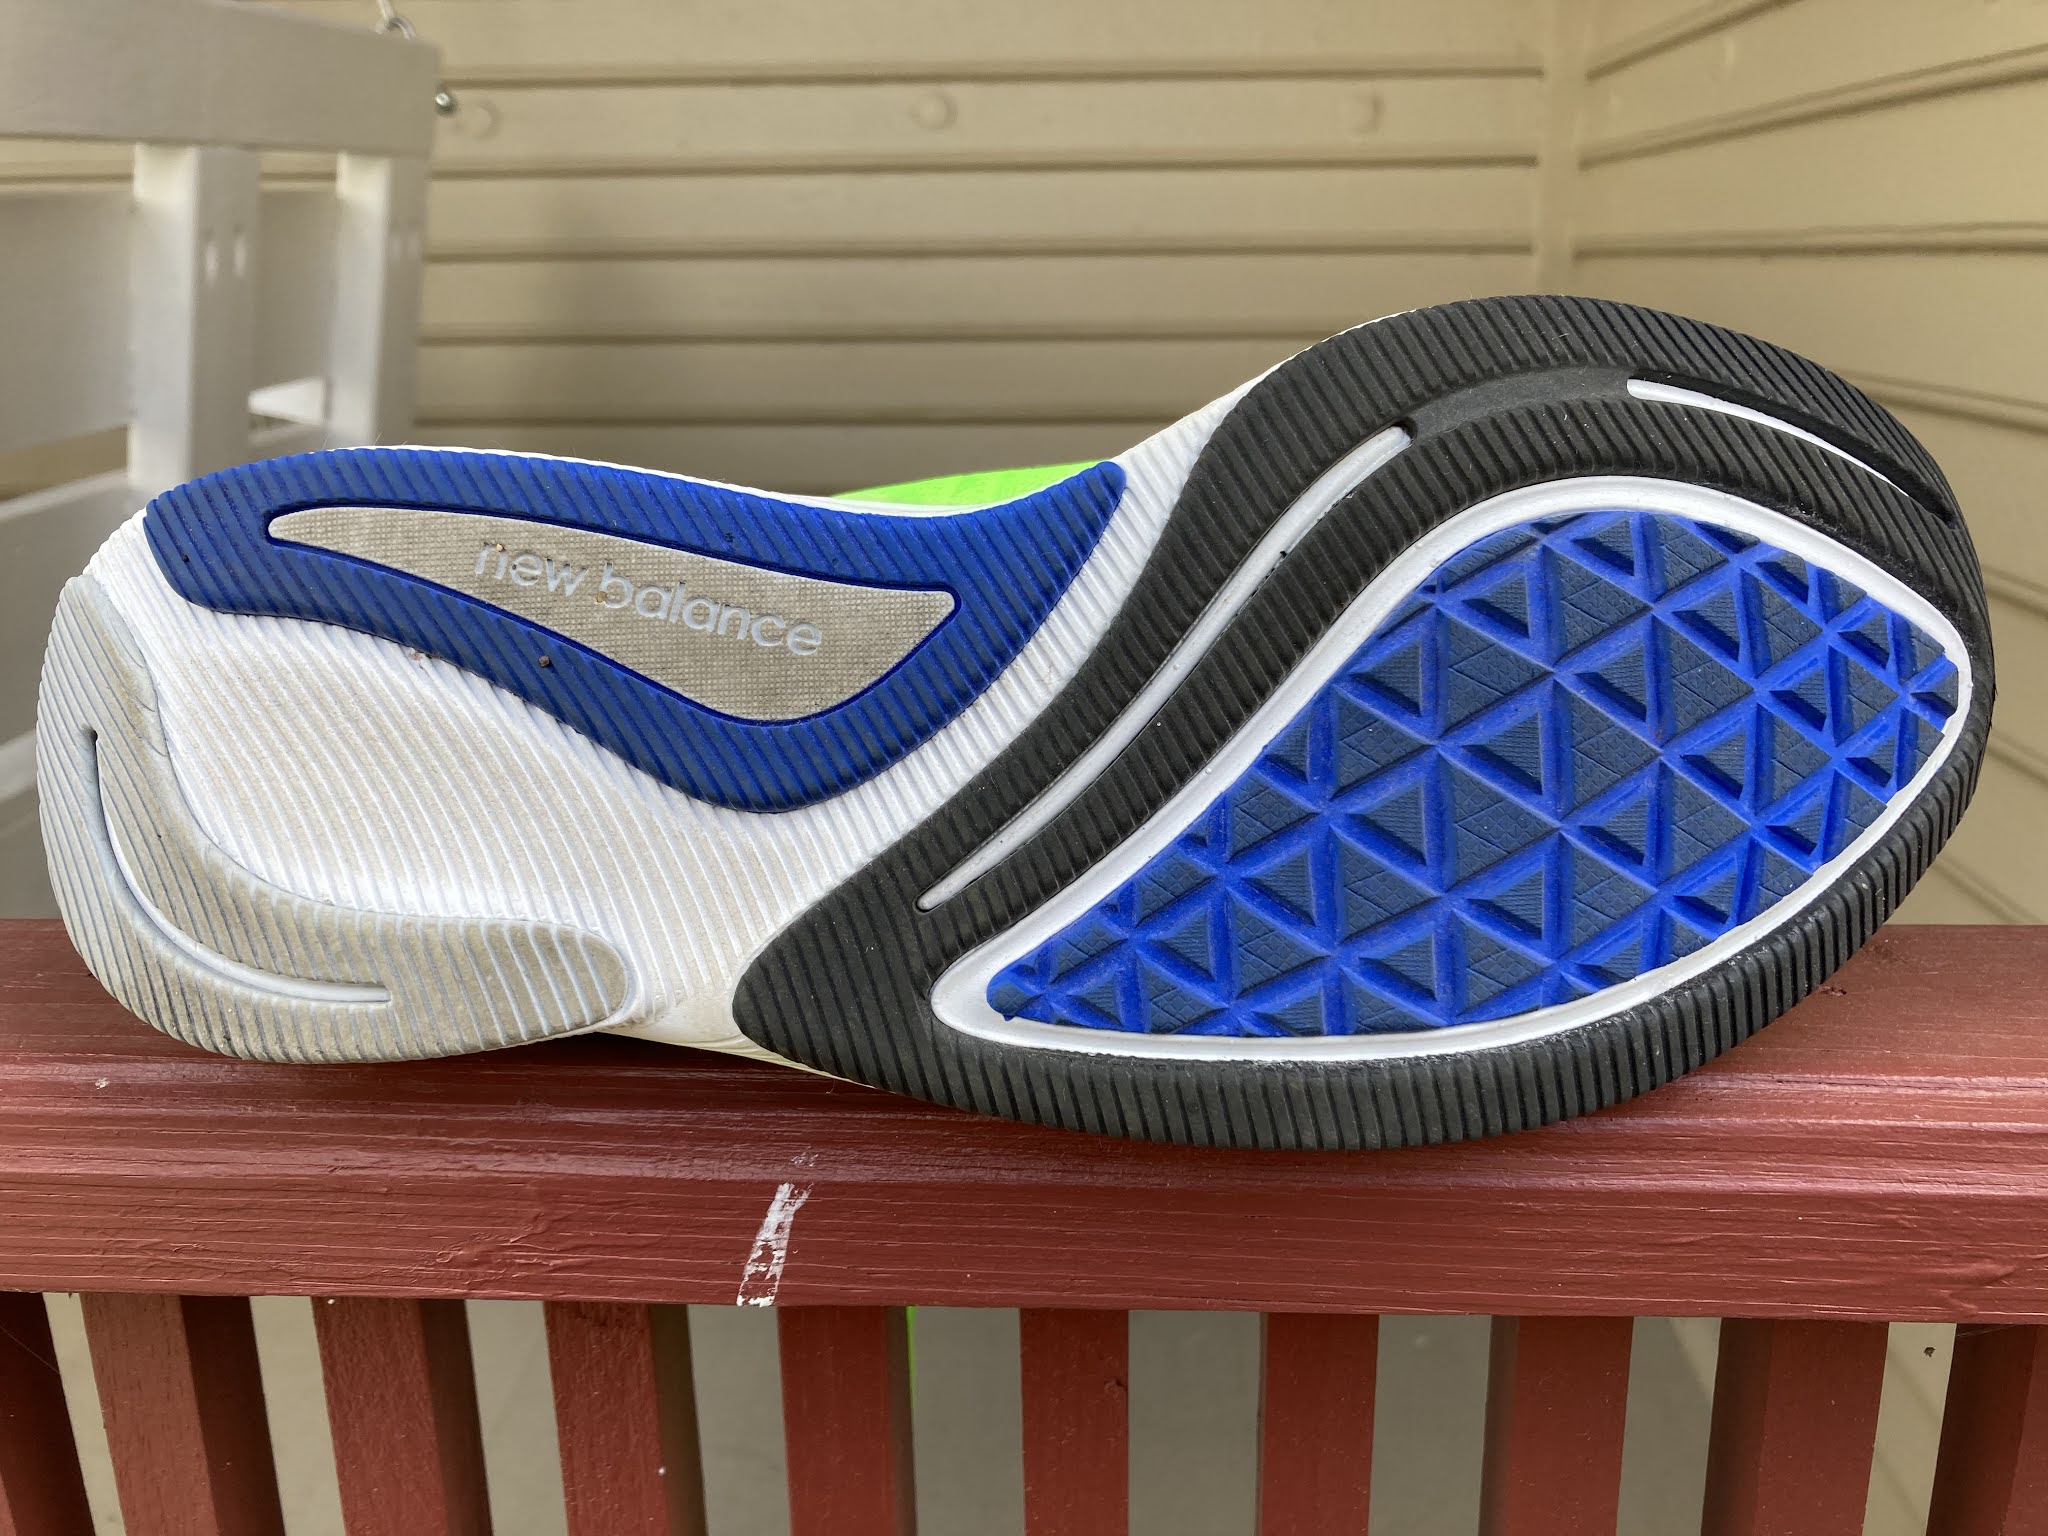 New Balance FuelCell Prism Initial Review - DOCTORS OF RUNNING